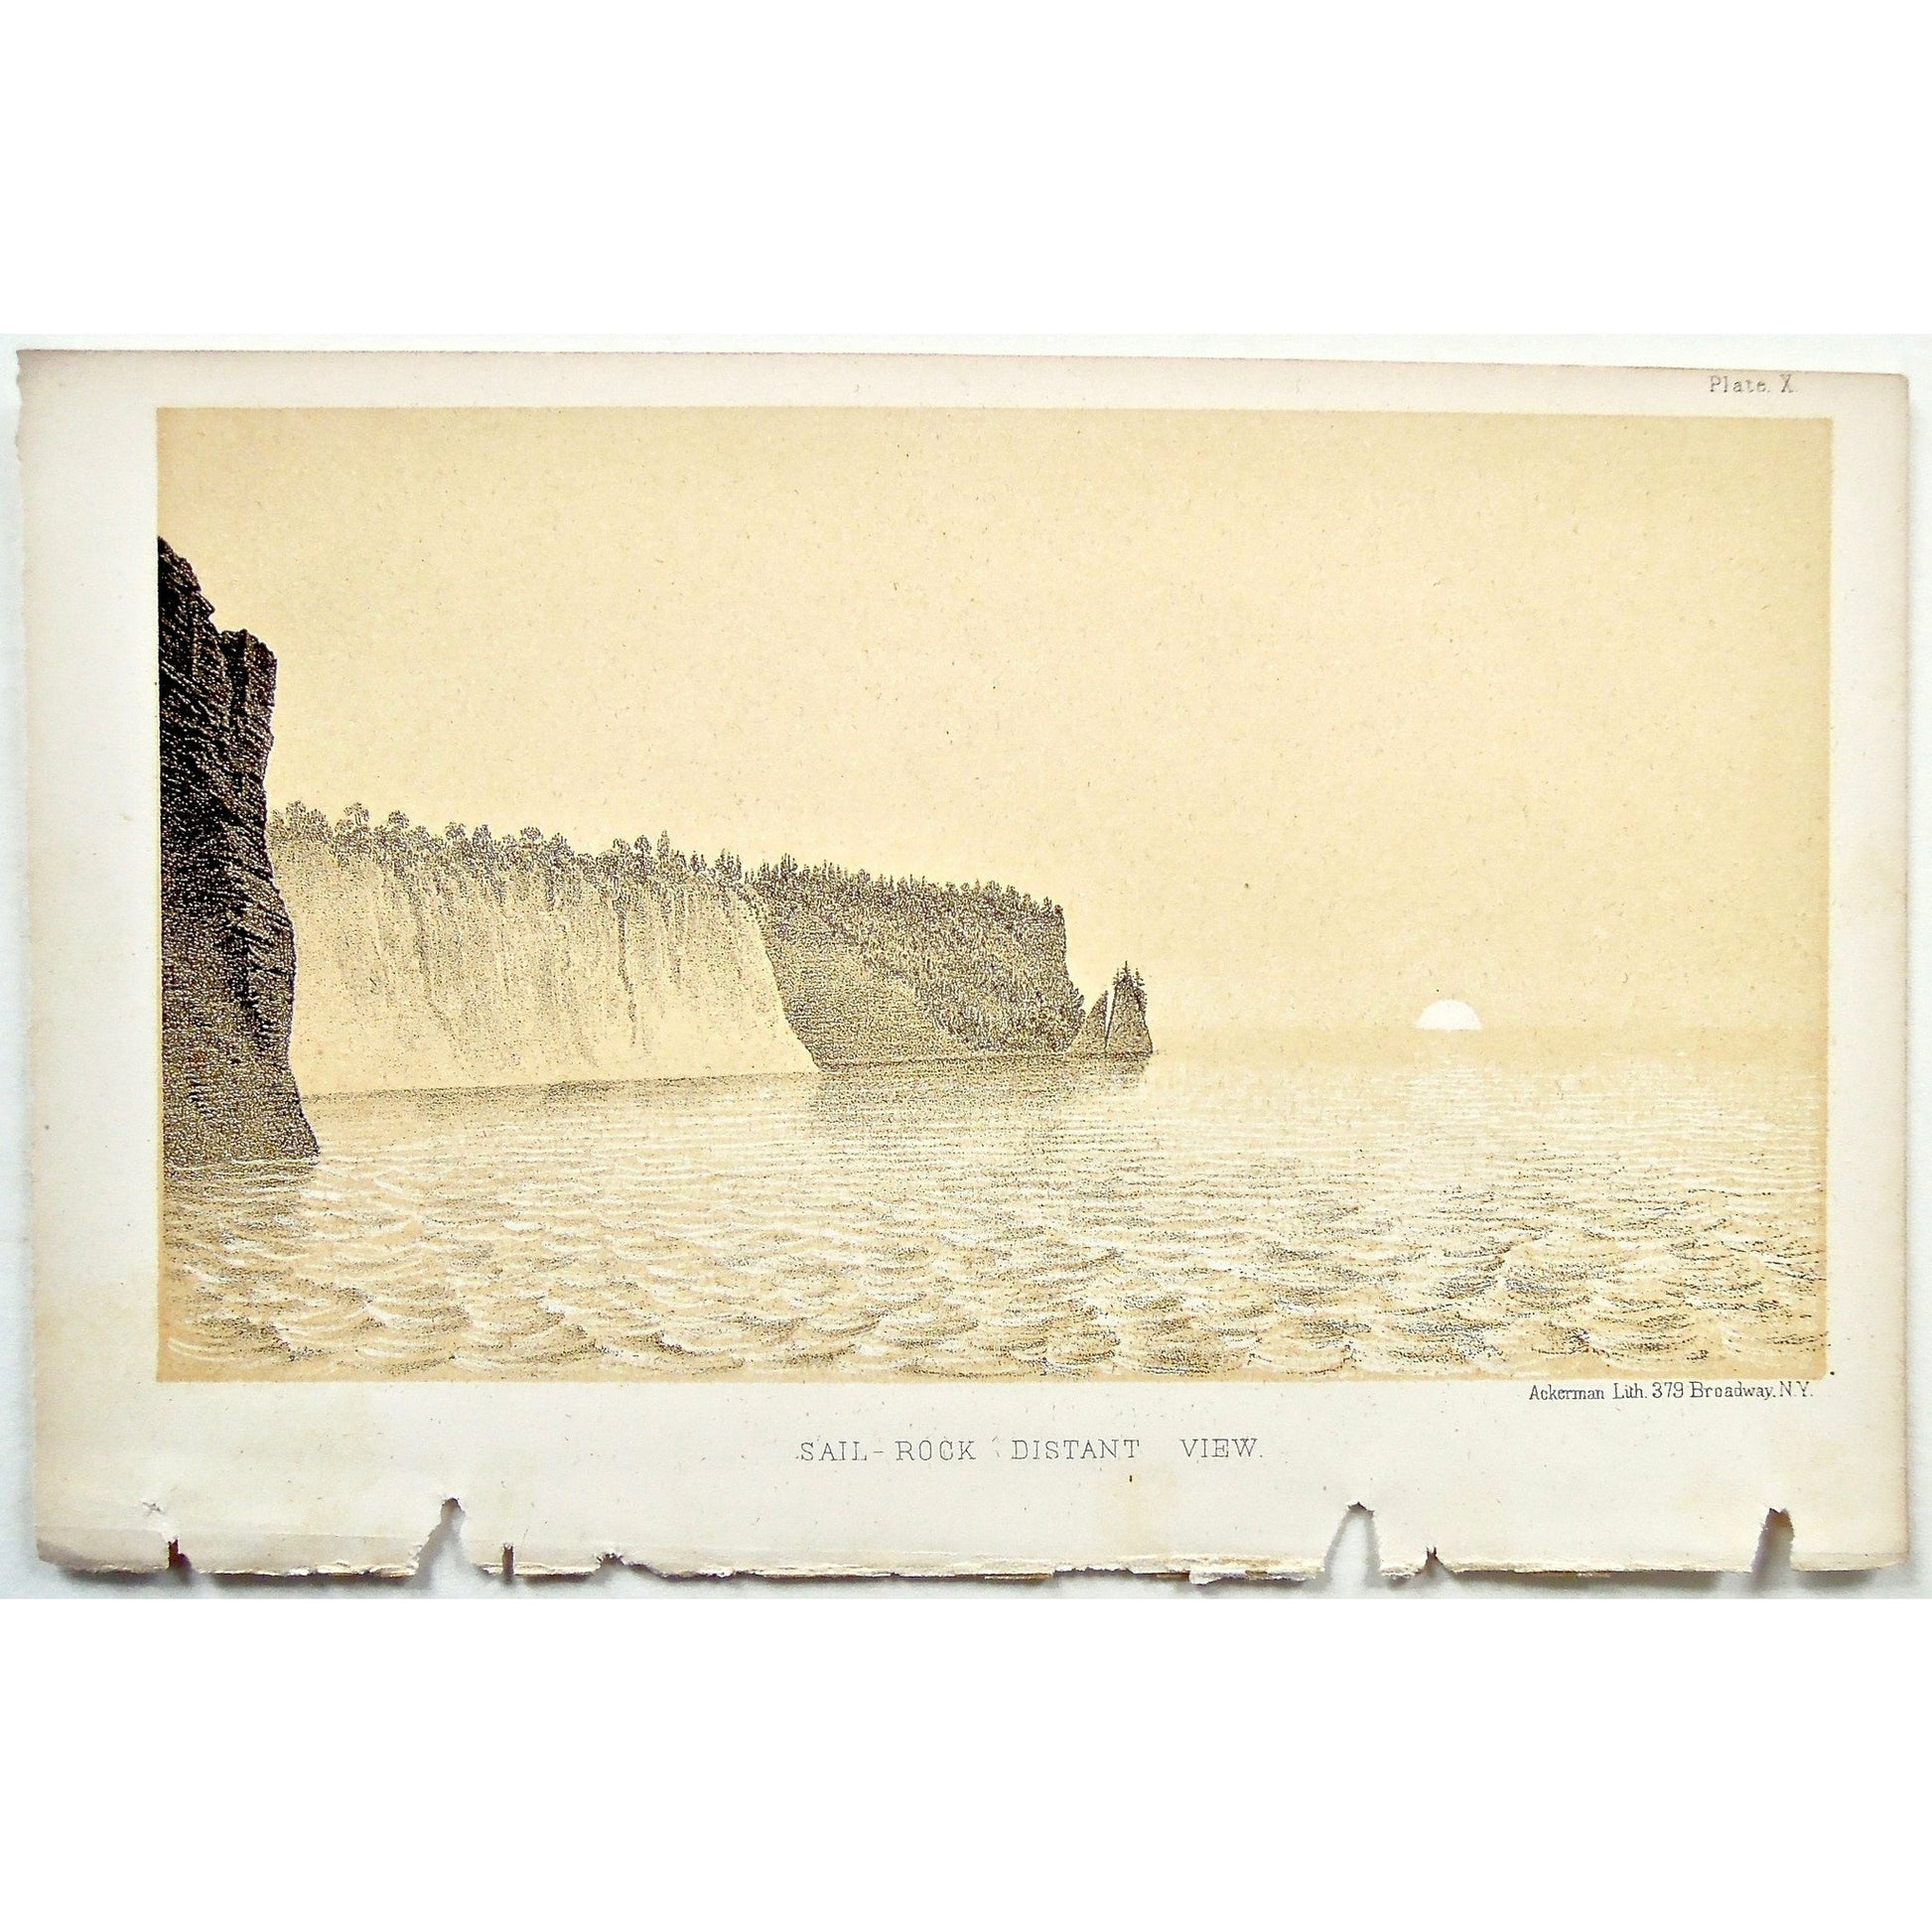 ail Rock, Sail, Rock, Sailboat, Horizon, Sunset, Distant View, Distant, Pictured Rocks, Lake View, View, Cliffs, Landscape, Lake Superior, Lake, Superior, National Lakeshore, Lakeshore, Michigan, MI, Ackerman, 379 Broadway, Foster, Whitney, House of Representatives, House of Reps., Report, Geology, Topography, Land District, State of Michigan, Part II, The Iron Region, General Geology, Washington D.C., Washington, DC, D.C., 1851, lithograph, two-toned, Antique Print, Antique, Prints, Vintage, Art, Wall art,